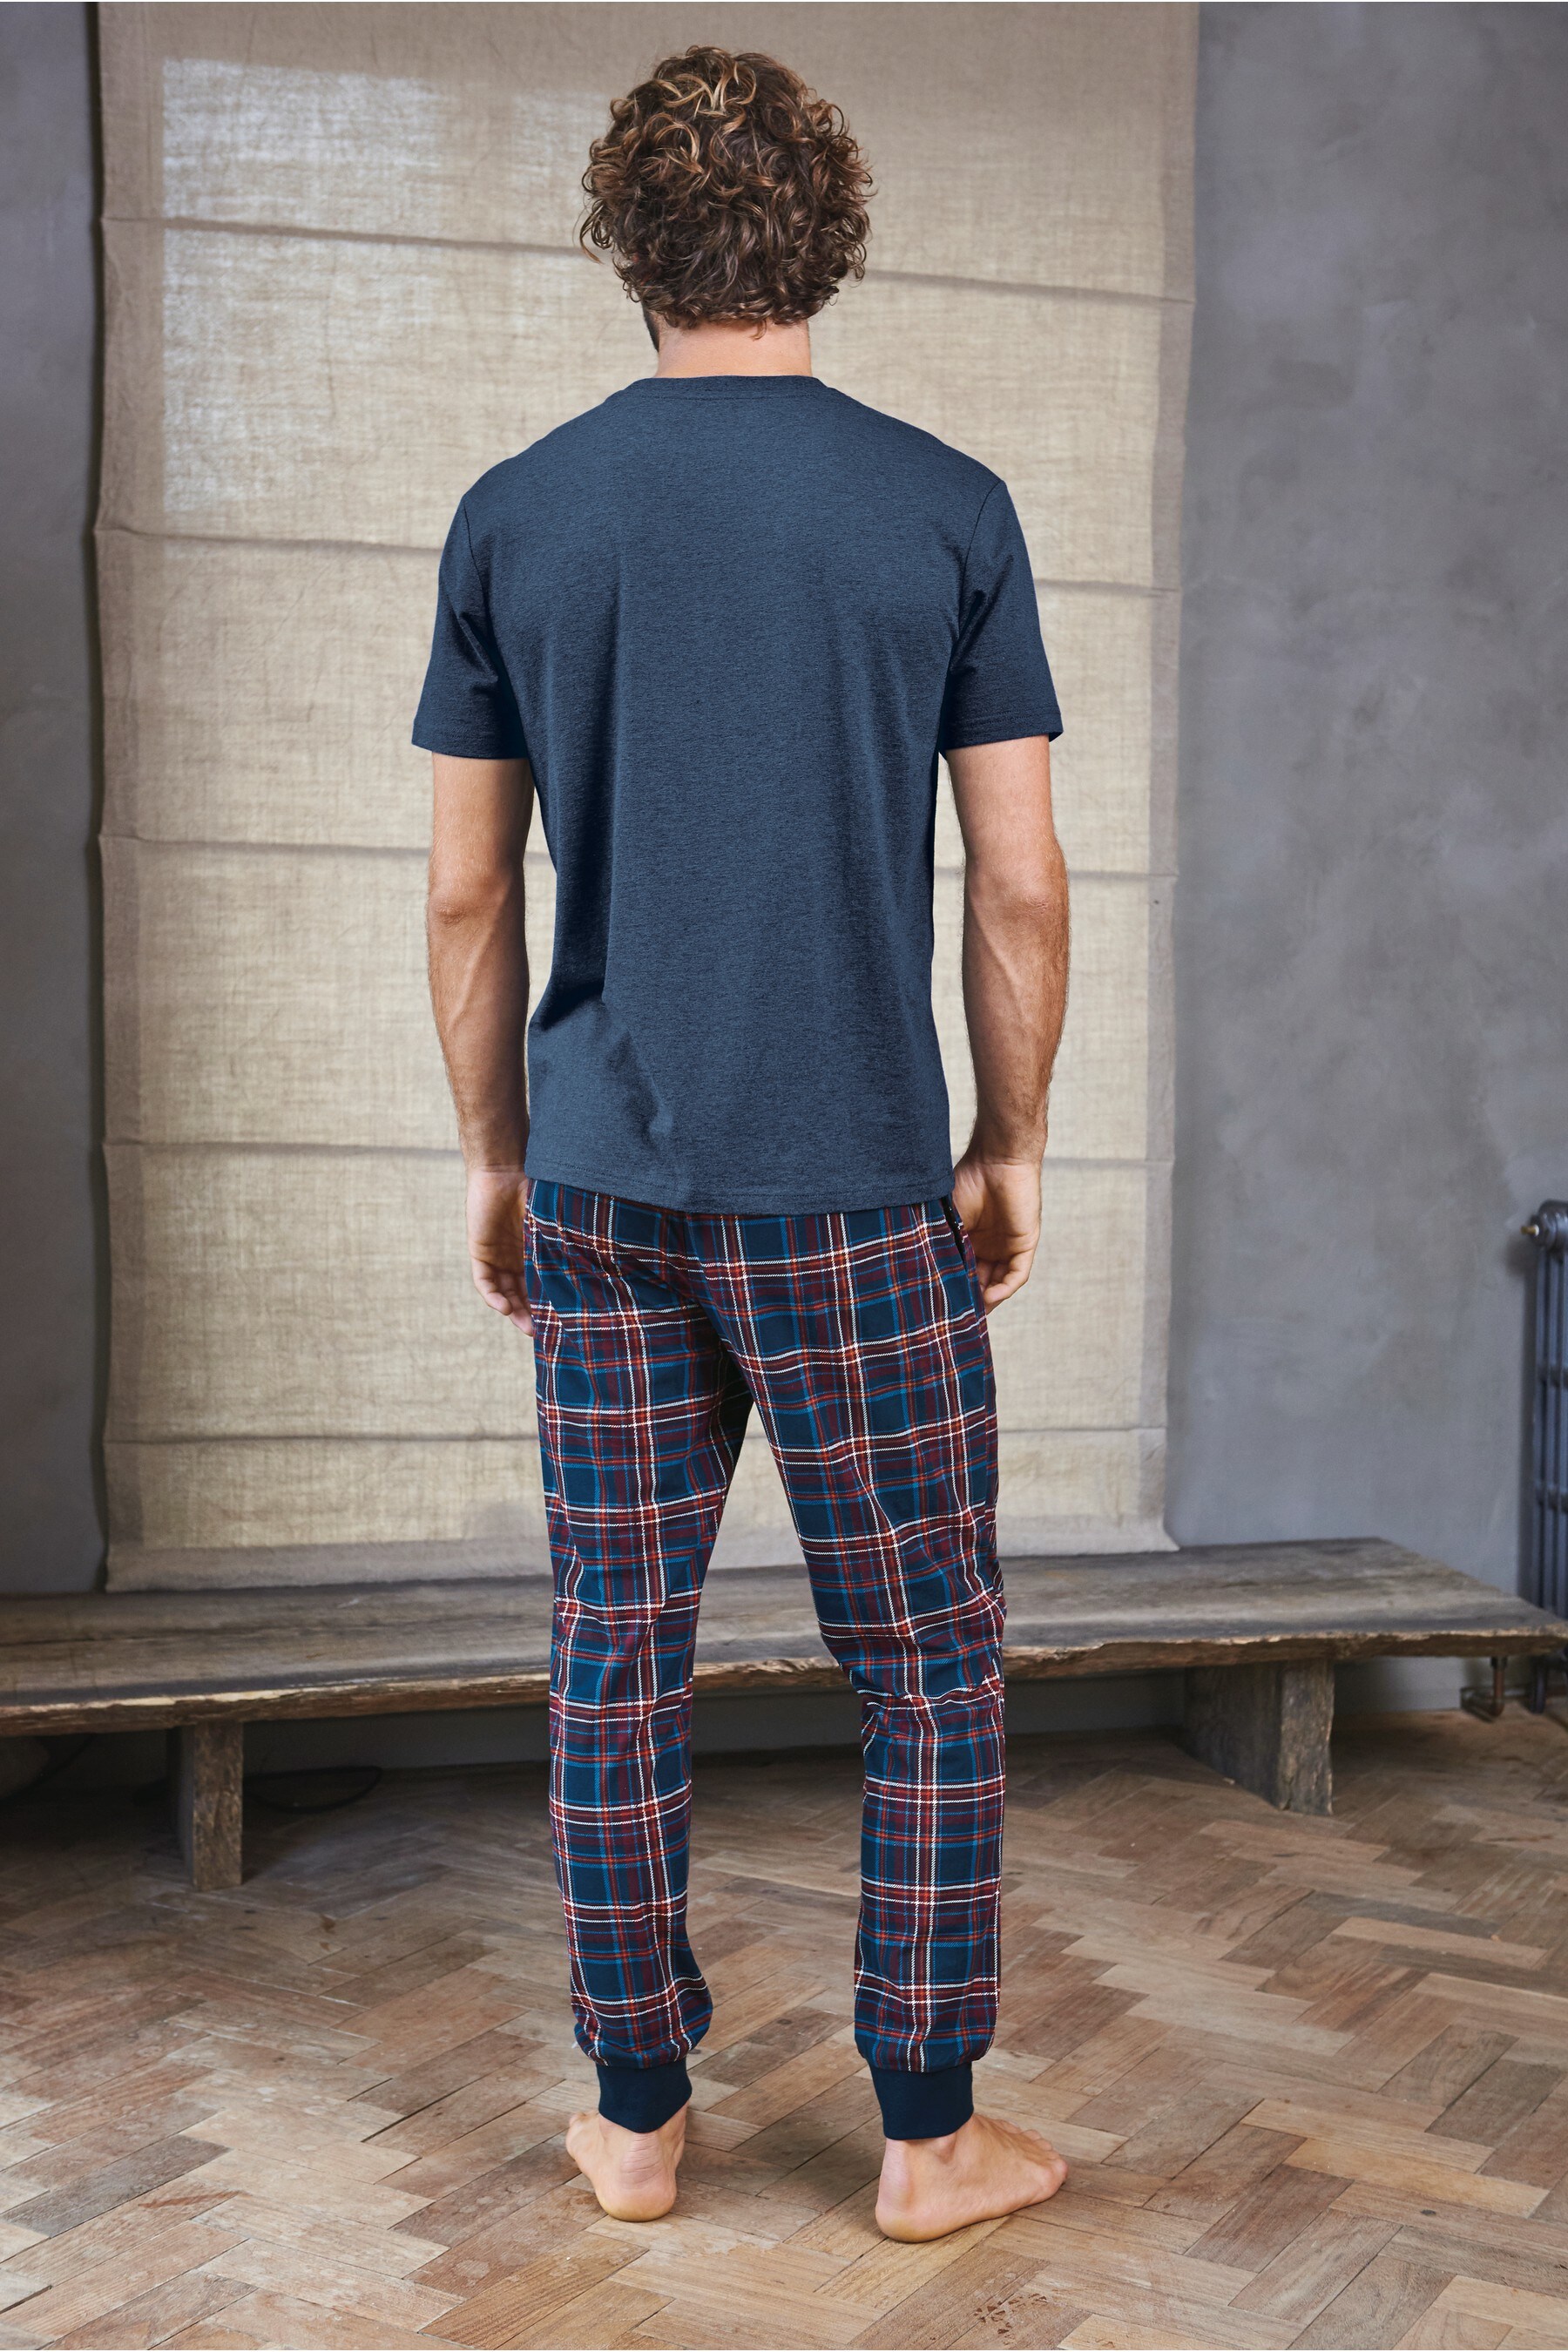 Buy Navy/Plum Check Cosy Cuffed Pyjama Set from the Next UK online shop